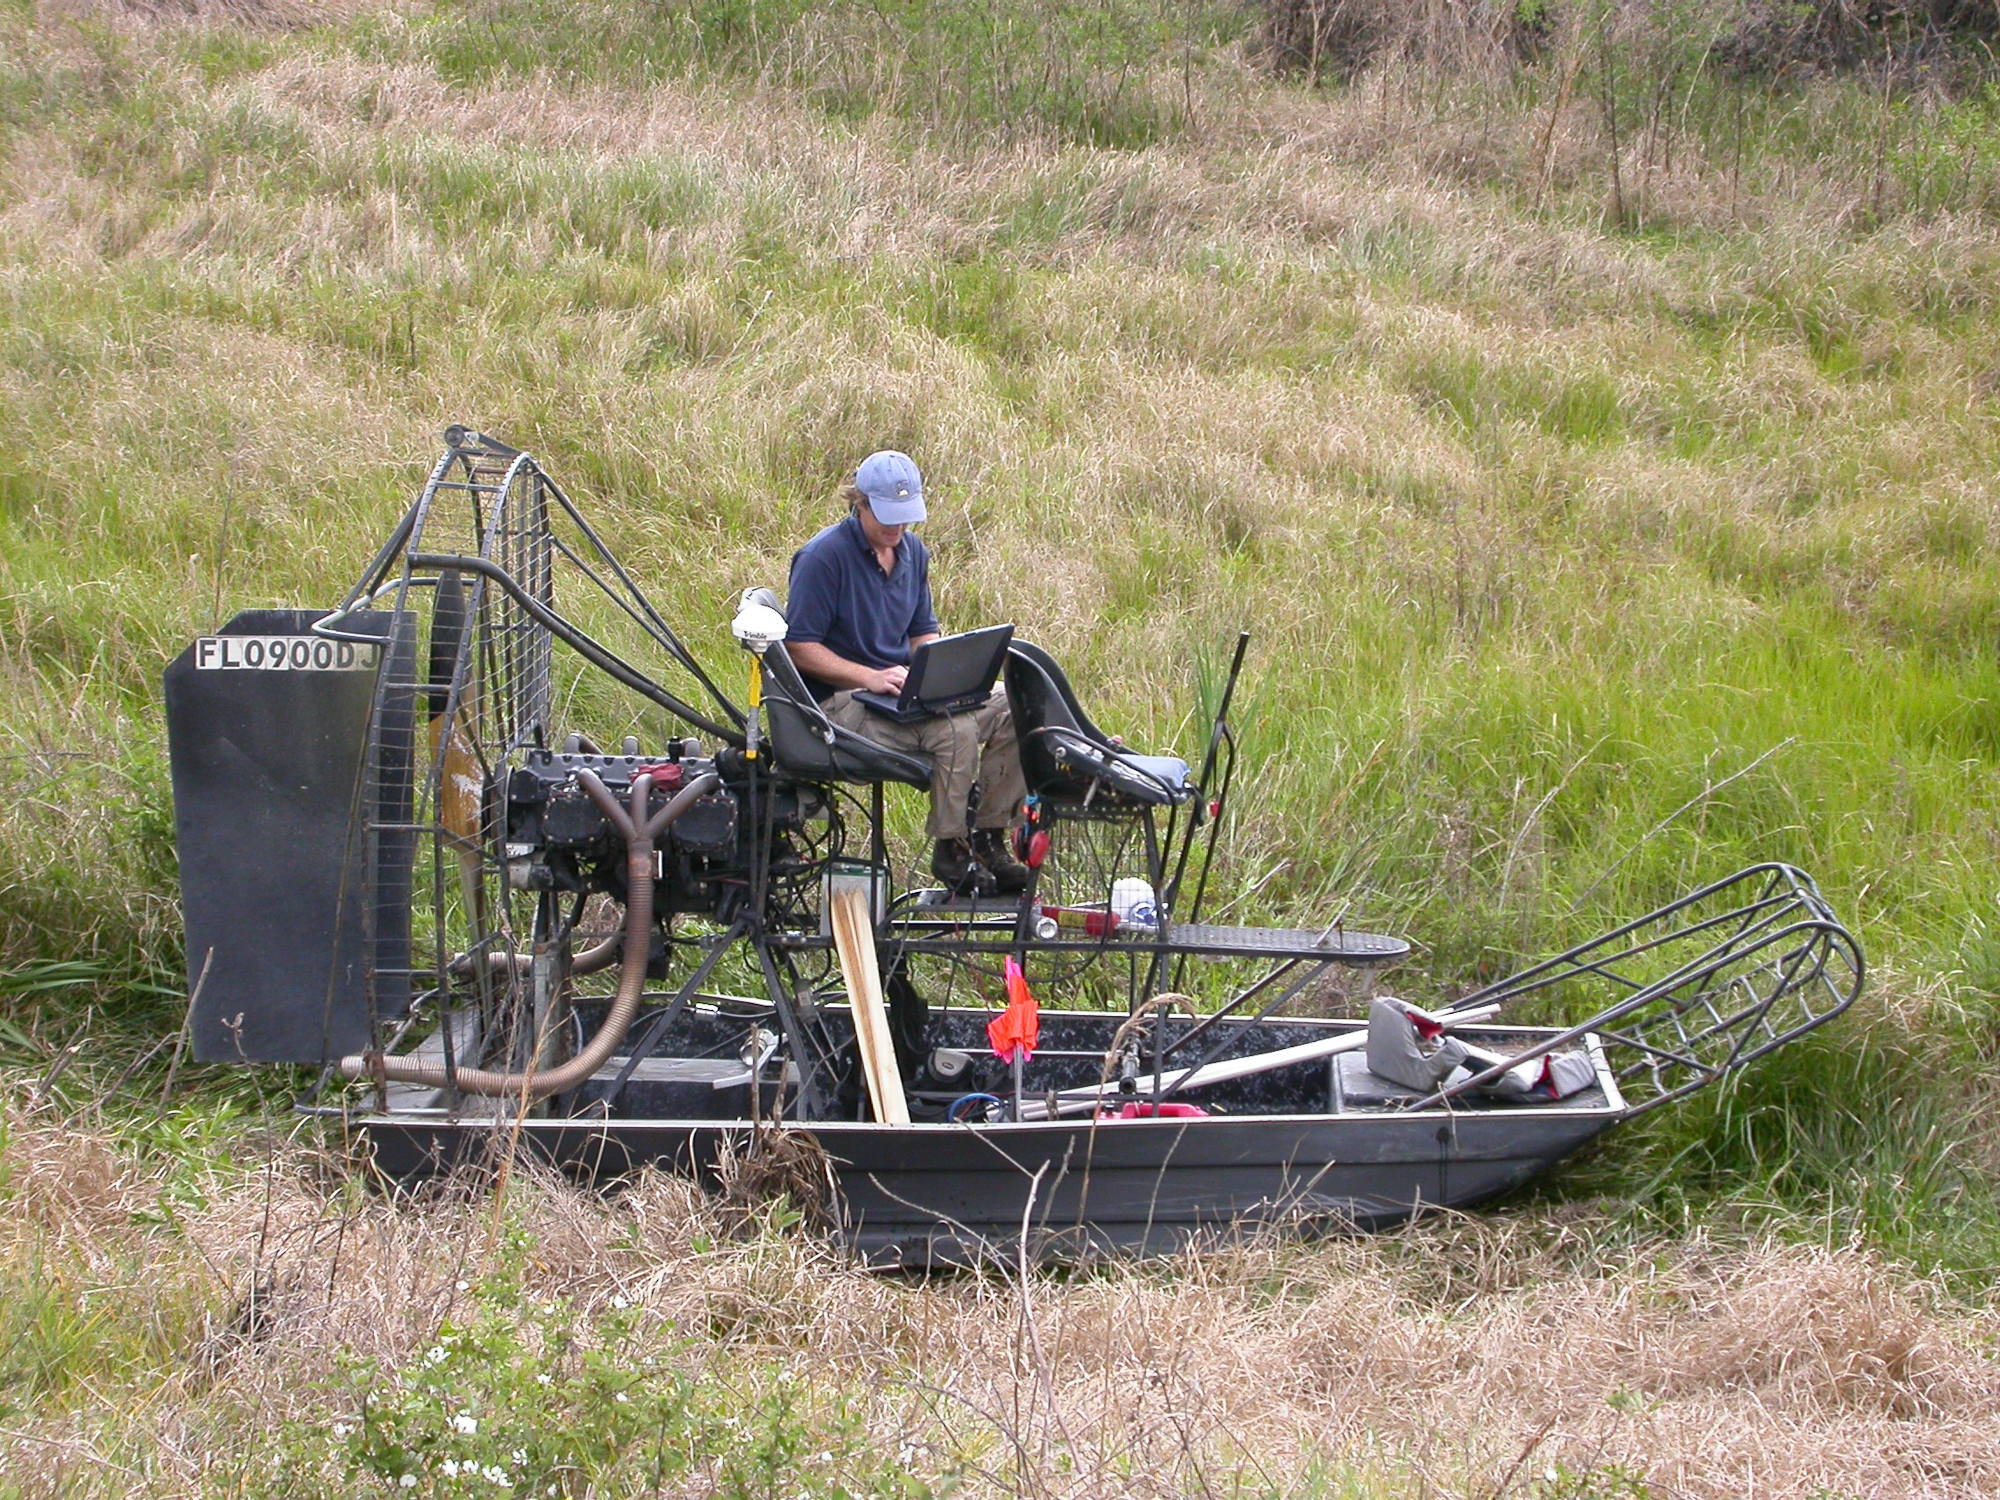 GPR Survey with an airboat to map extends of sinkhole features